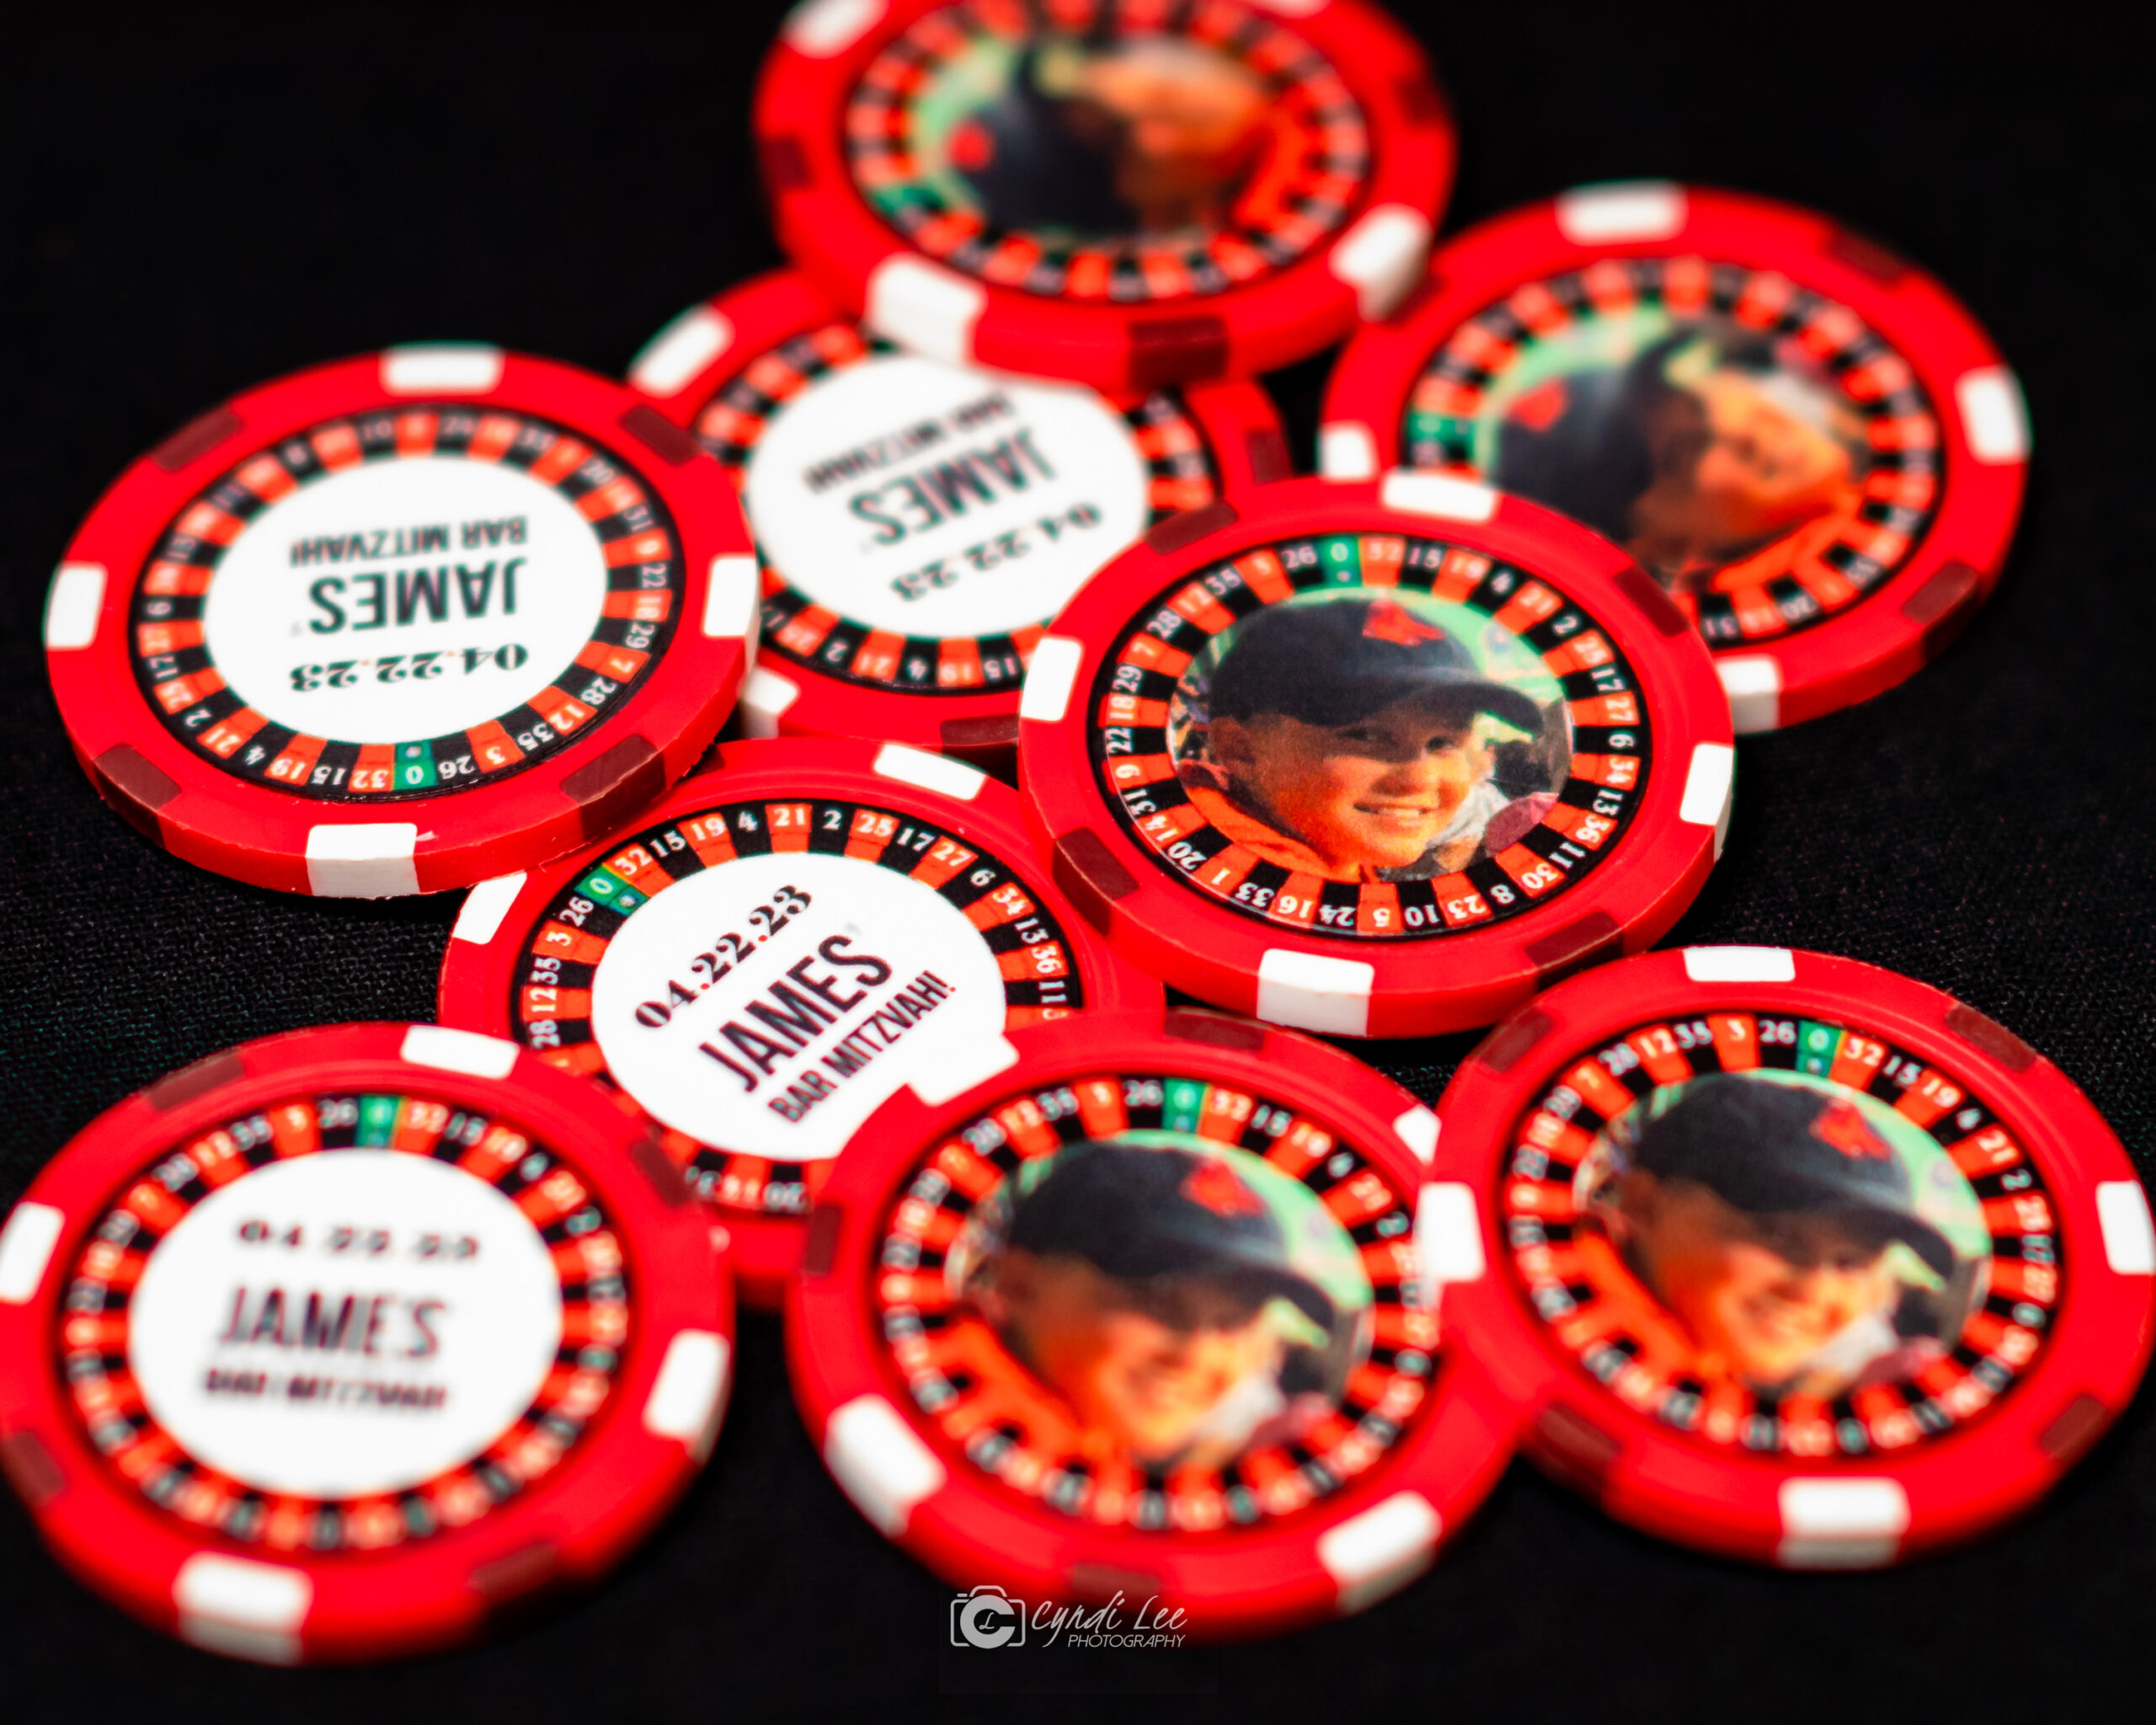 Custom poker chips at James's Electric Casino Bar Mitzvah Party at Temple Rodef Shalom in Falls Church, VA | Pop Color Events | Adding a Pop of Color to Bar & Bat Mitzvahs in DC, MD & VA | Photo by: Cyndi Lee Photography